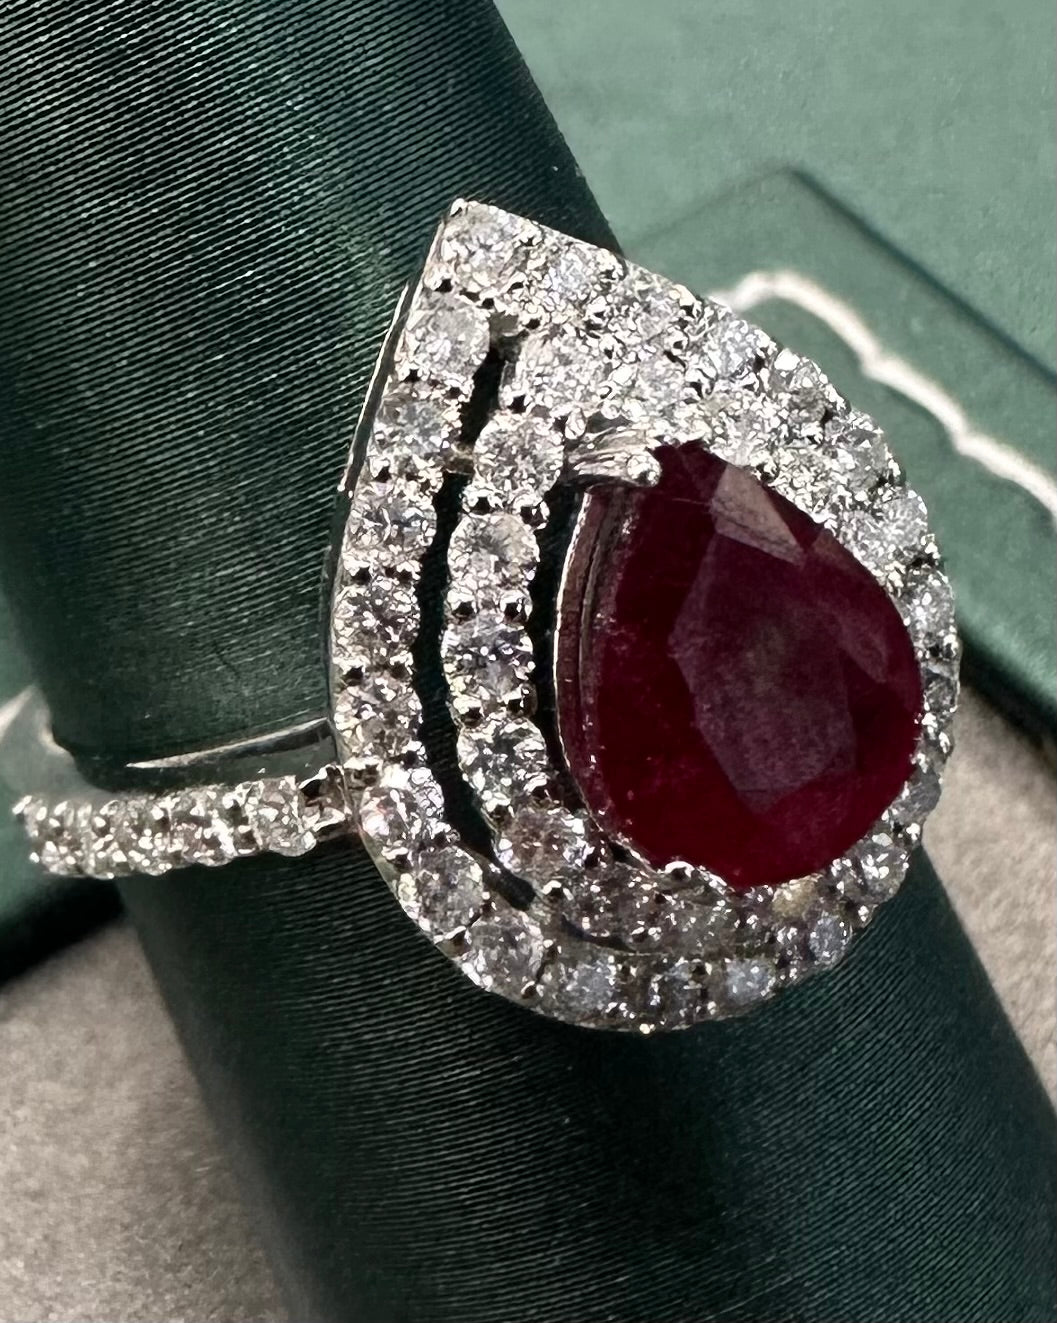 The ruby tearing ring